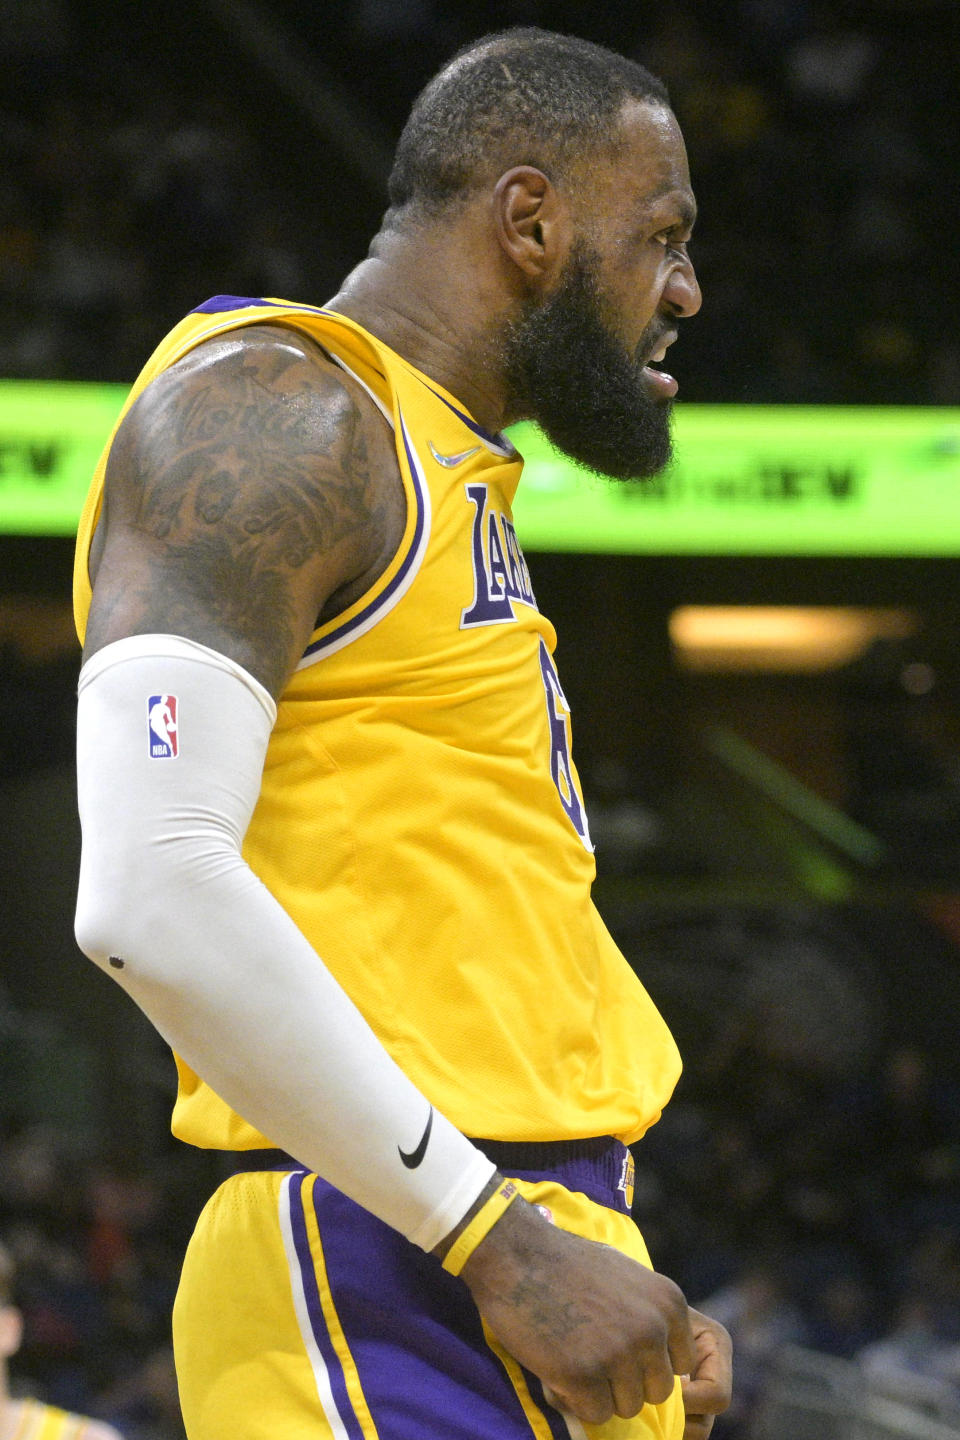 Los Angeles Lakers forward LeBron James (6) reacts after scoring during the first half of an NBA basketball game against the Orlando Magic, Friday, Jan. 21, 2022, in Orlando, Fla. (AP Photo/Phelan M. Ebenhack)